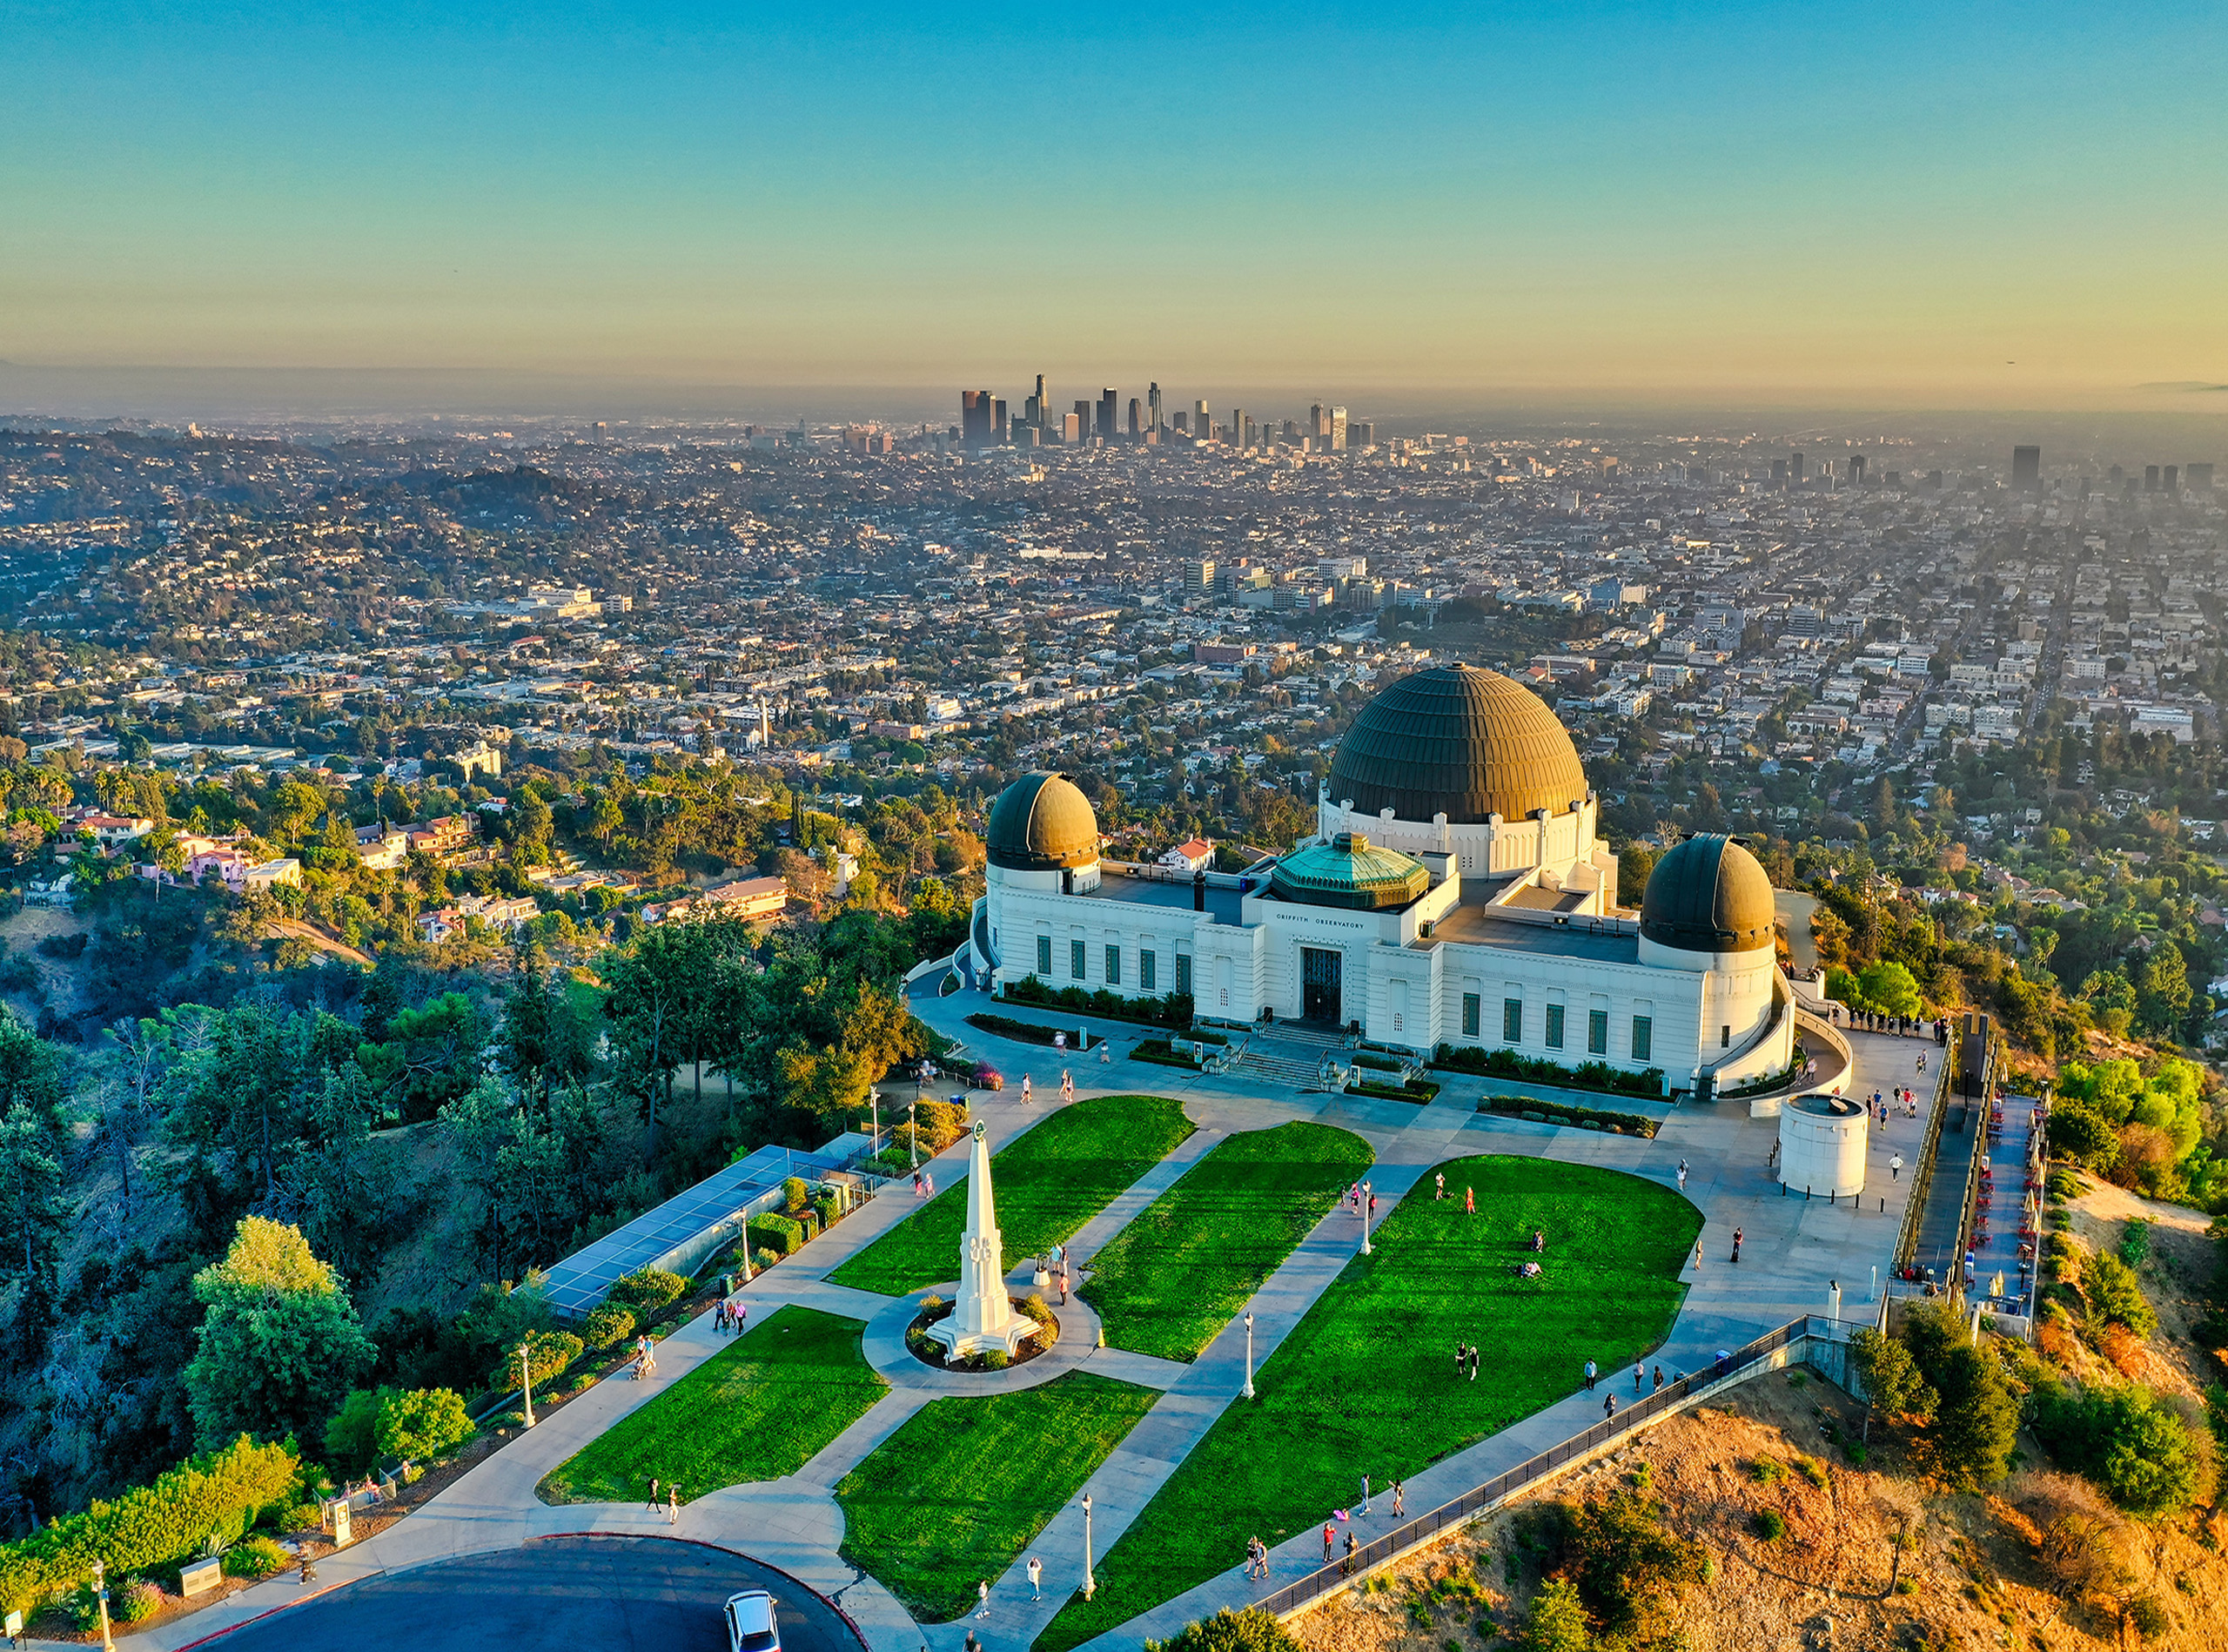 Griffith Park observatory